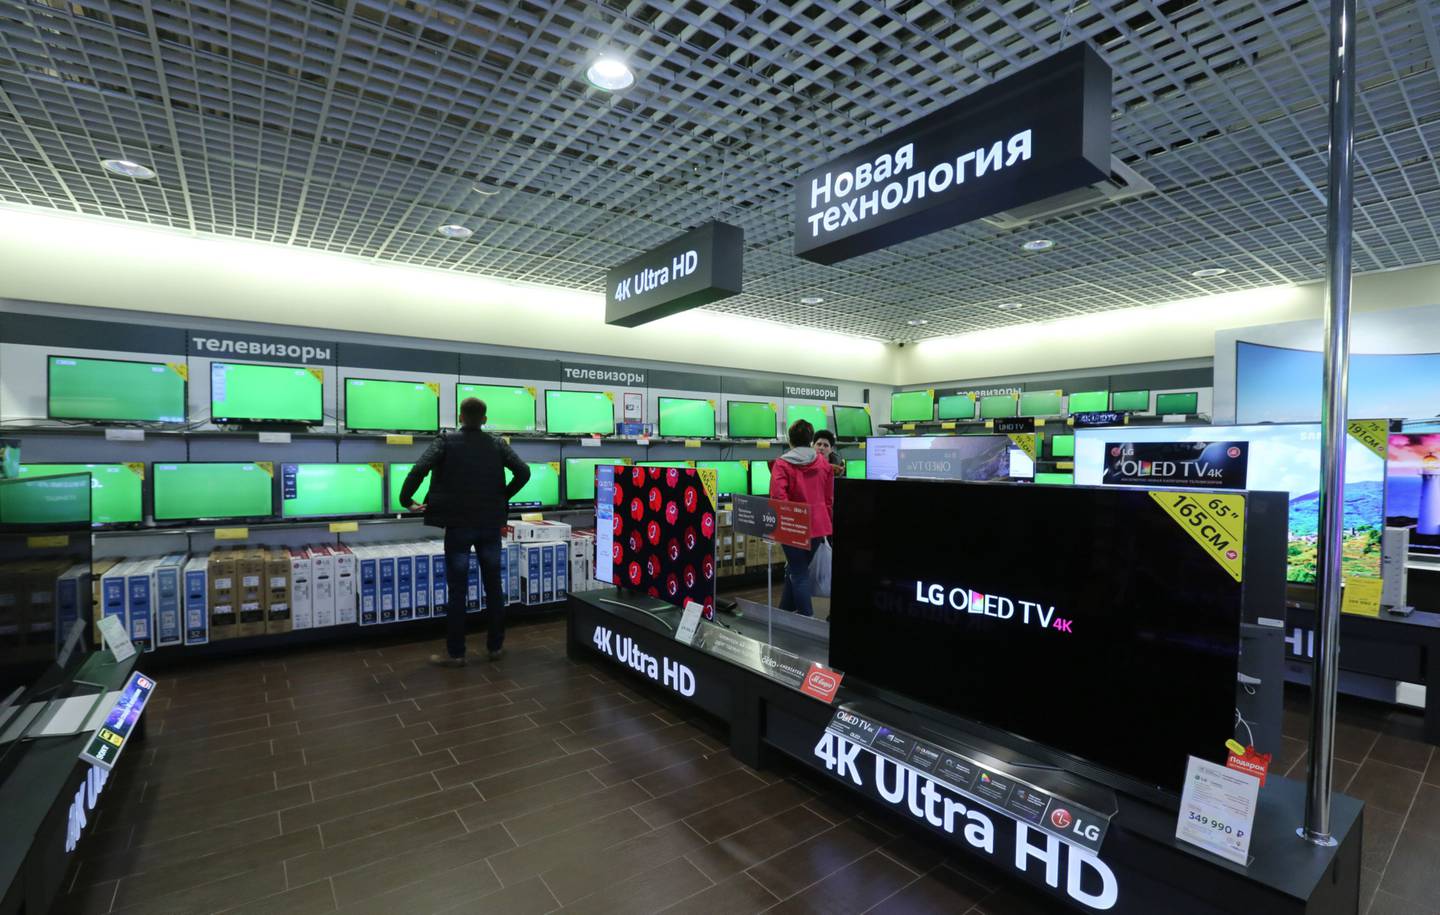 Customers browse digital television screens including a display of 4K ultra HD Oled products by LG Electronics Inc. inside an M.Video PJSC electronics store inside the Mega Khimki shopping mall in Khimki, Russia, on Sunday, April 23, 2017. M.Video operates a chain of consumer electronics and home appliances retail stores and is Russia's biggest electronics retailer. Photographer: Andrey Rudakov/Bloombergdfd